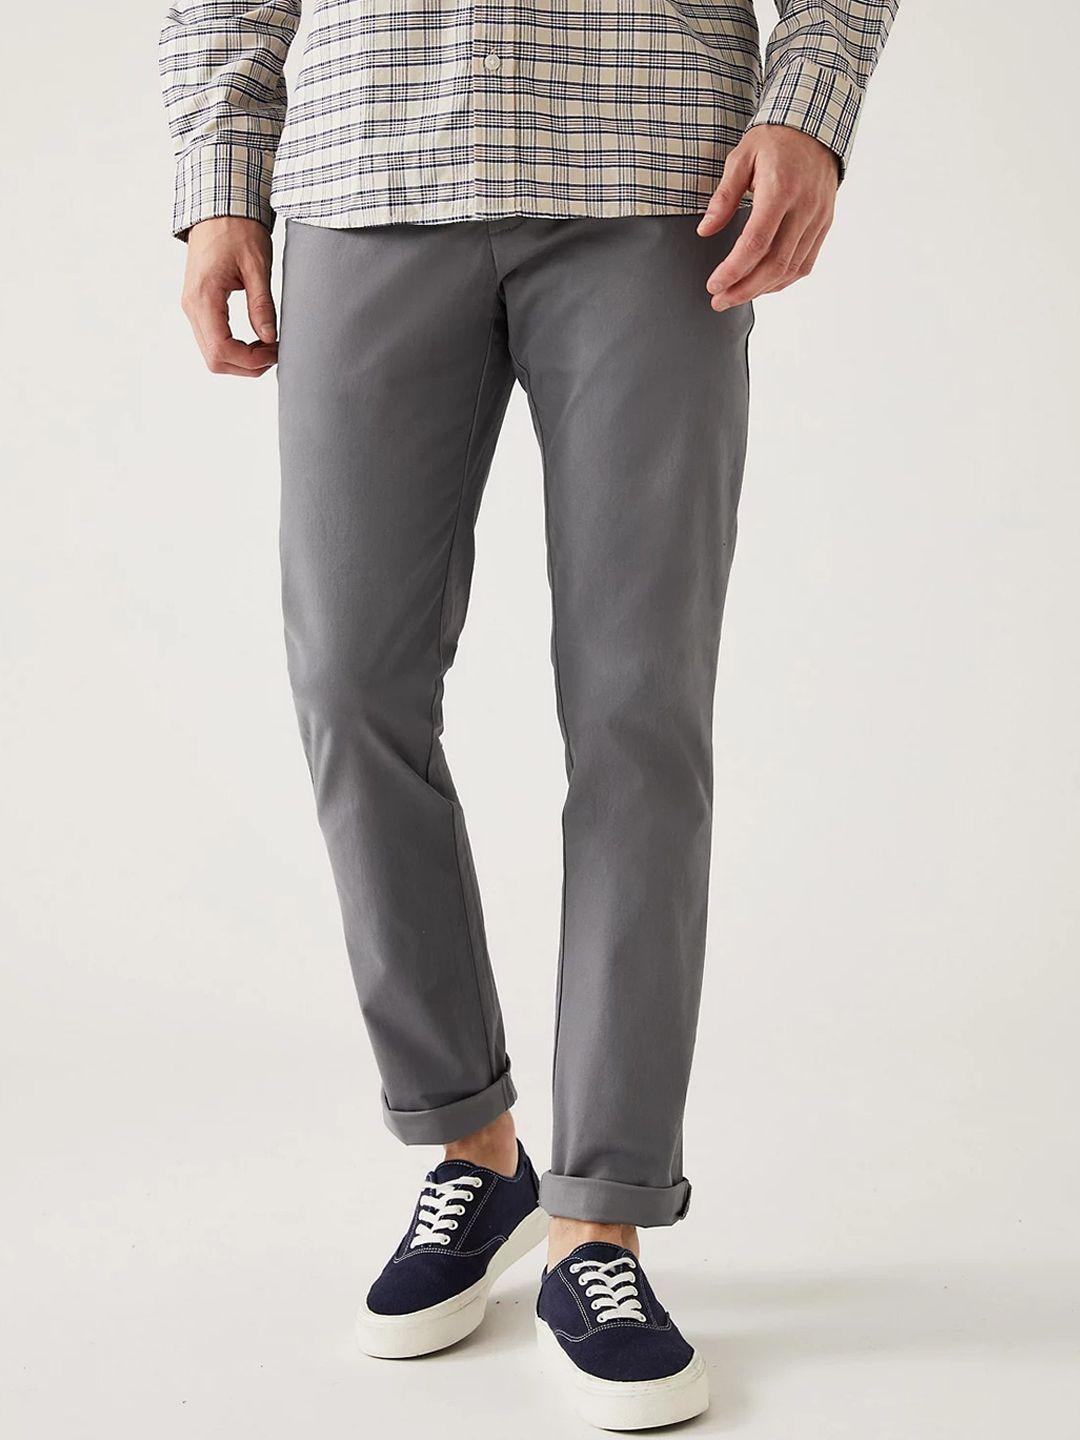 marks-&-spencer-men-mid-rise-chinos-trousers